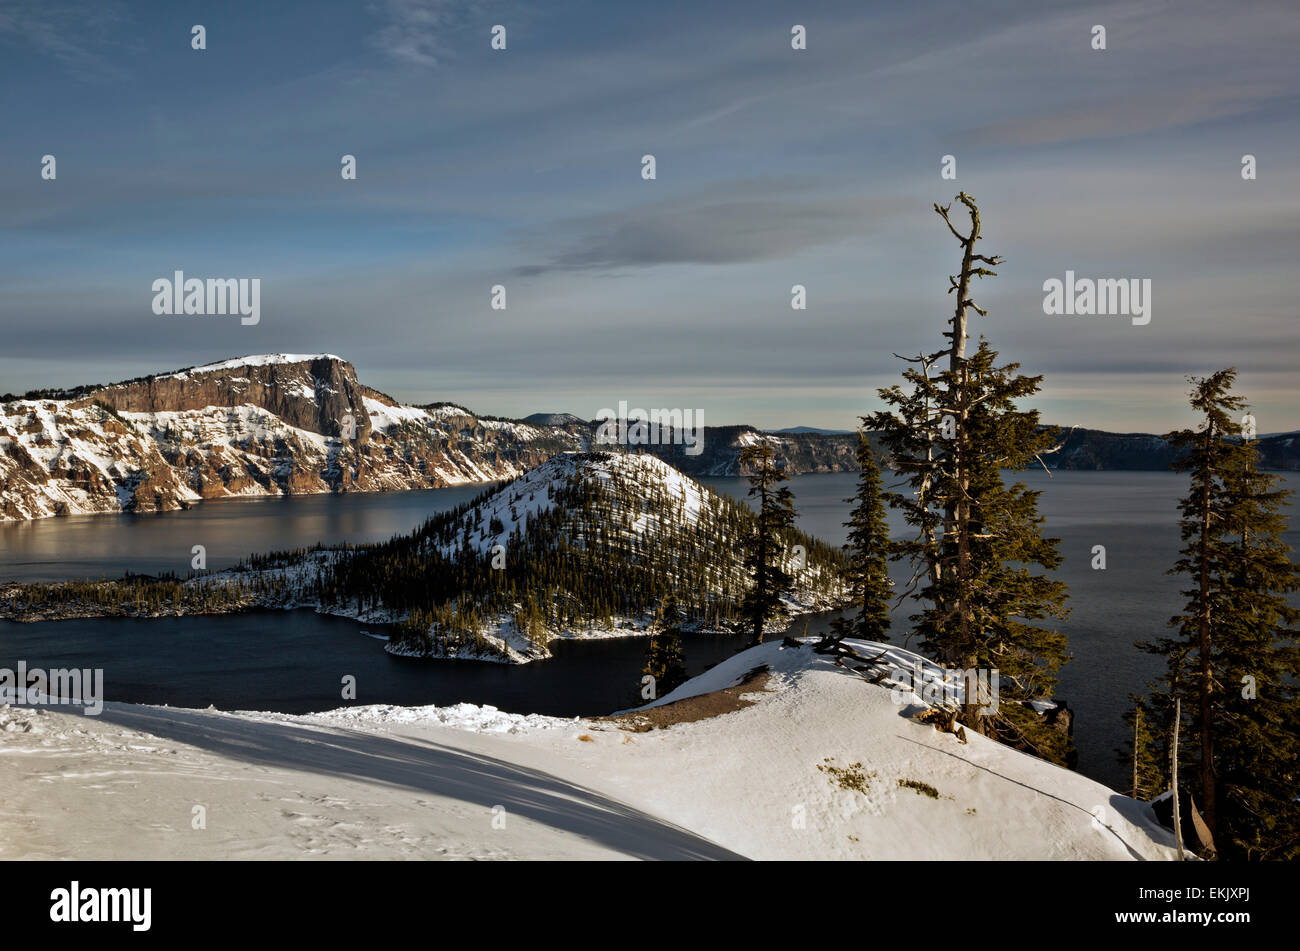 OR02126-00...OREGON - Wizard Island and Llao Rock from the snow covered Rim Drive in Crater Lake National Park. Stock Photo